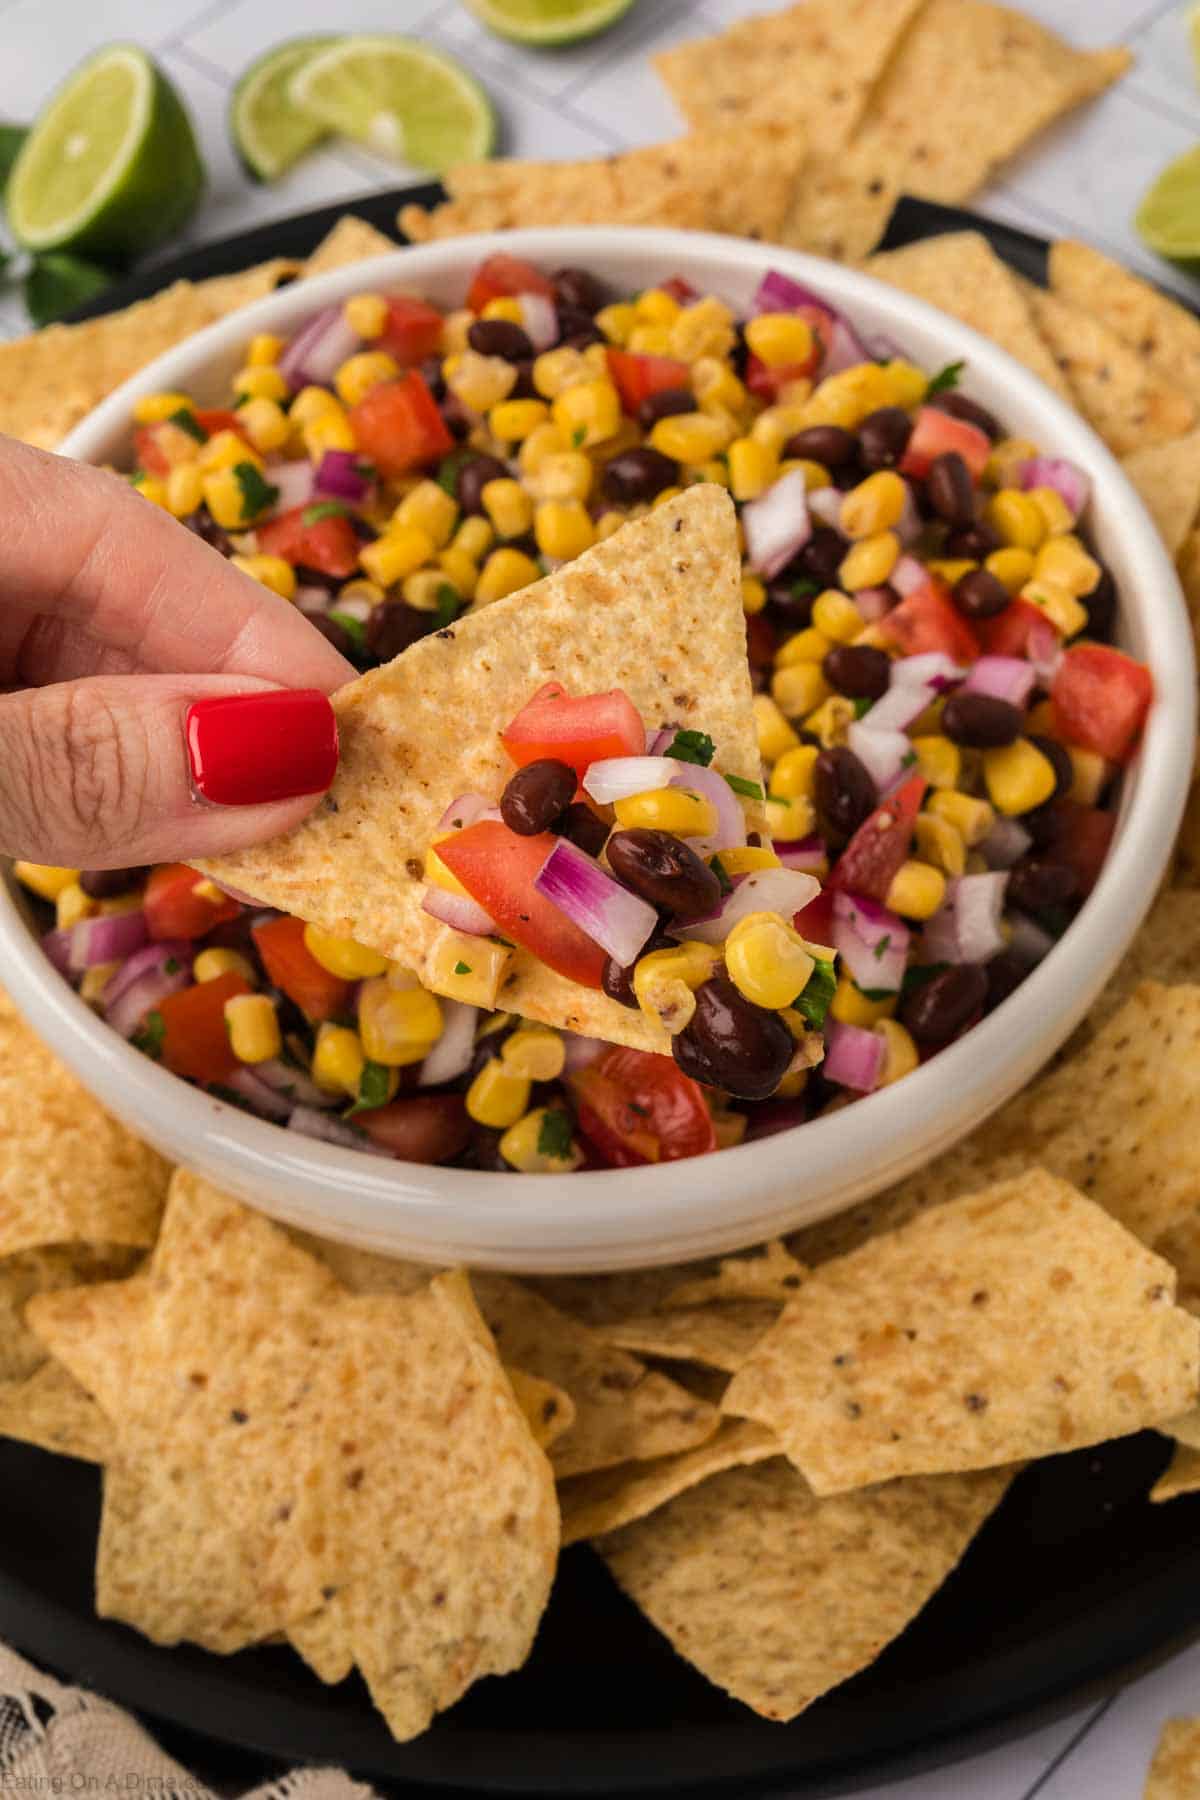 A hand with red nail polish holds a tortilla chip topped with vibrant black bean salsa, featuring a colorful mix of corn, tomatoes, onions, and cilantro. The chip is lifted from a white bowl filled with the same mixture, surrounded by additional tortilla chips and lime wedges.